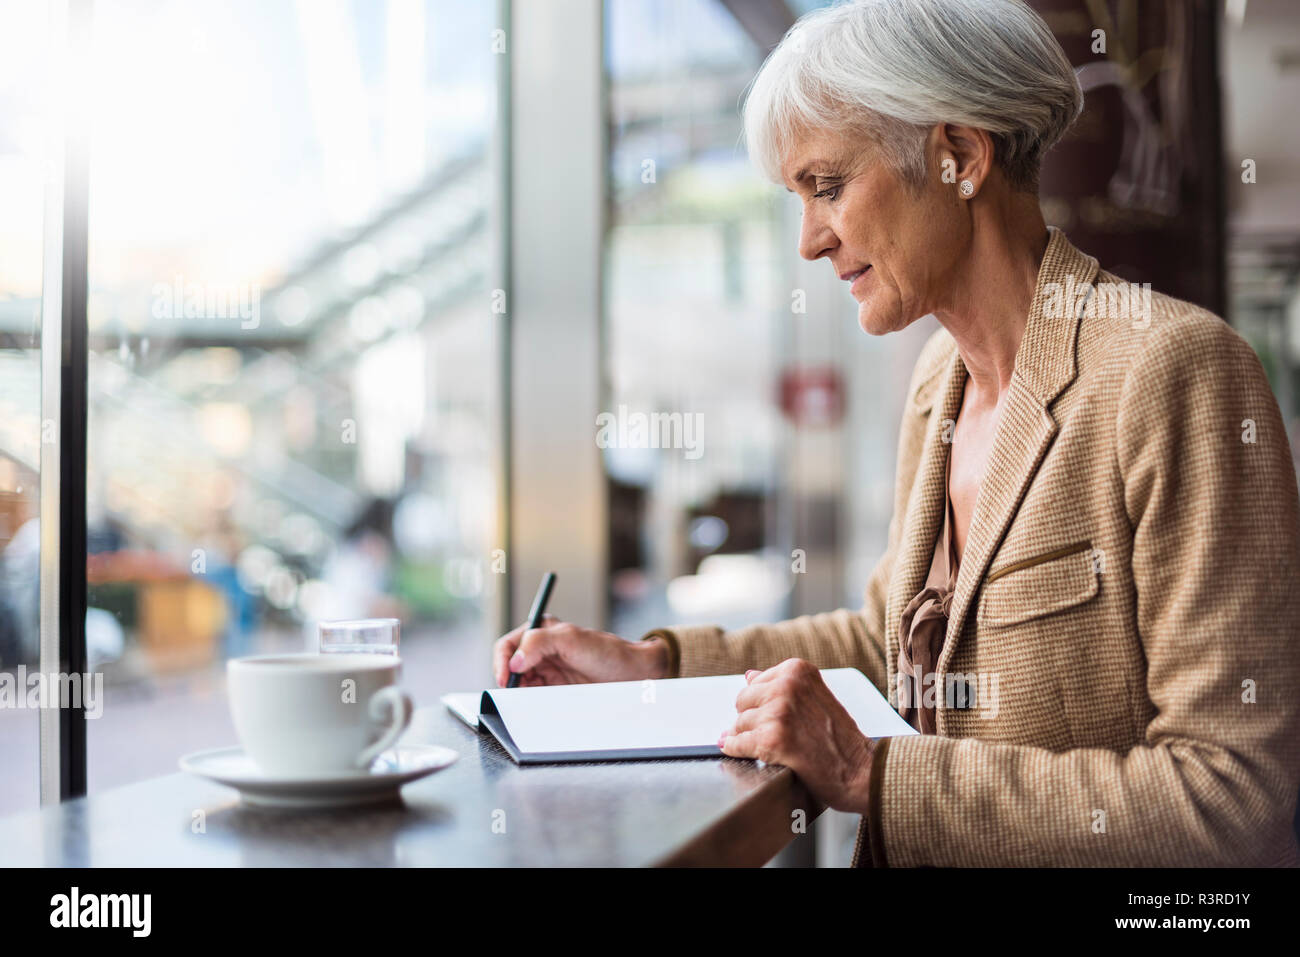 Senior businesswoman taking notes in a cafe Banque D'Images